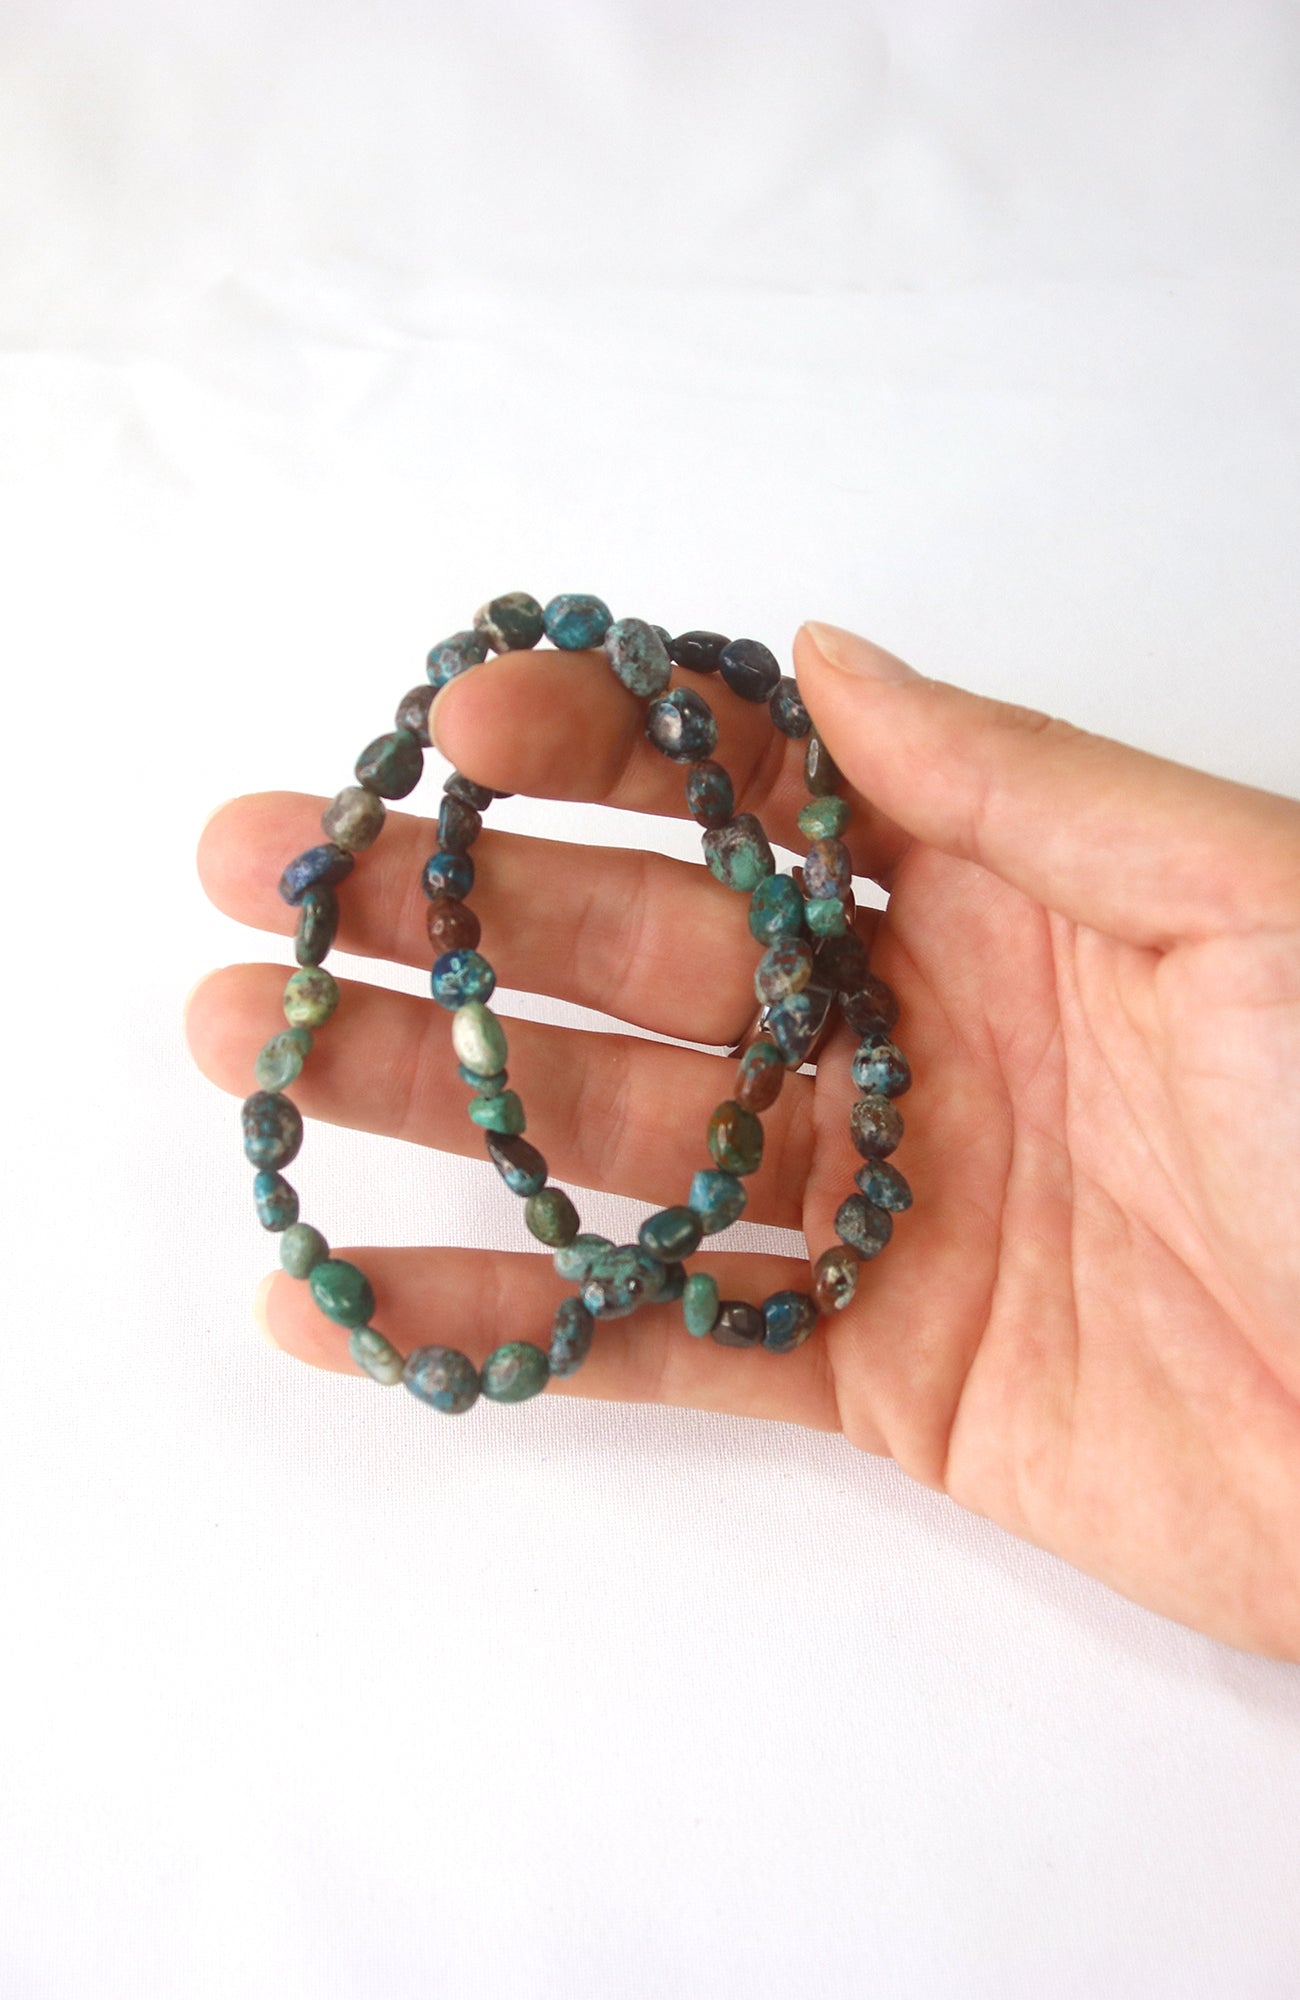 Chrysocolla 6-8mm Nugget Bead Bracelet for wrists up to 20cm